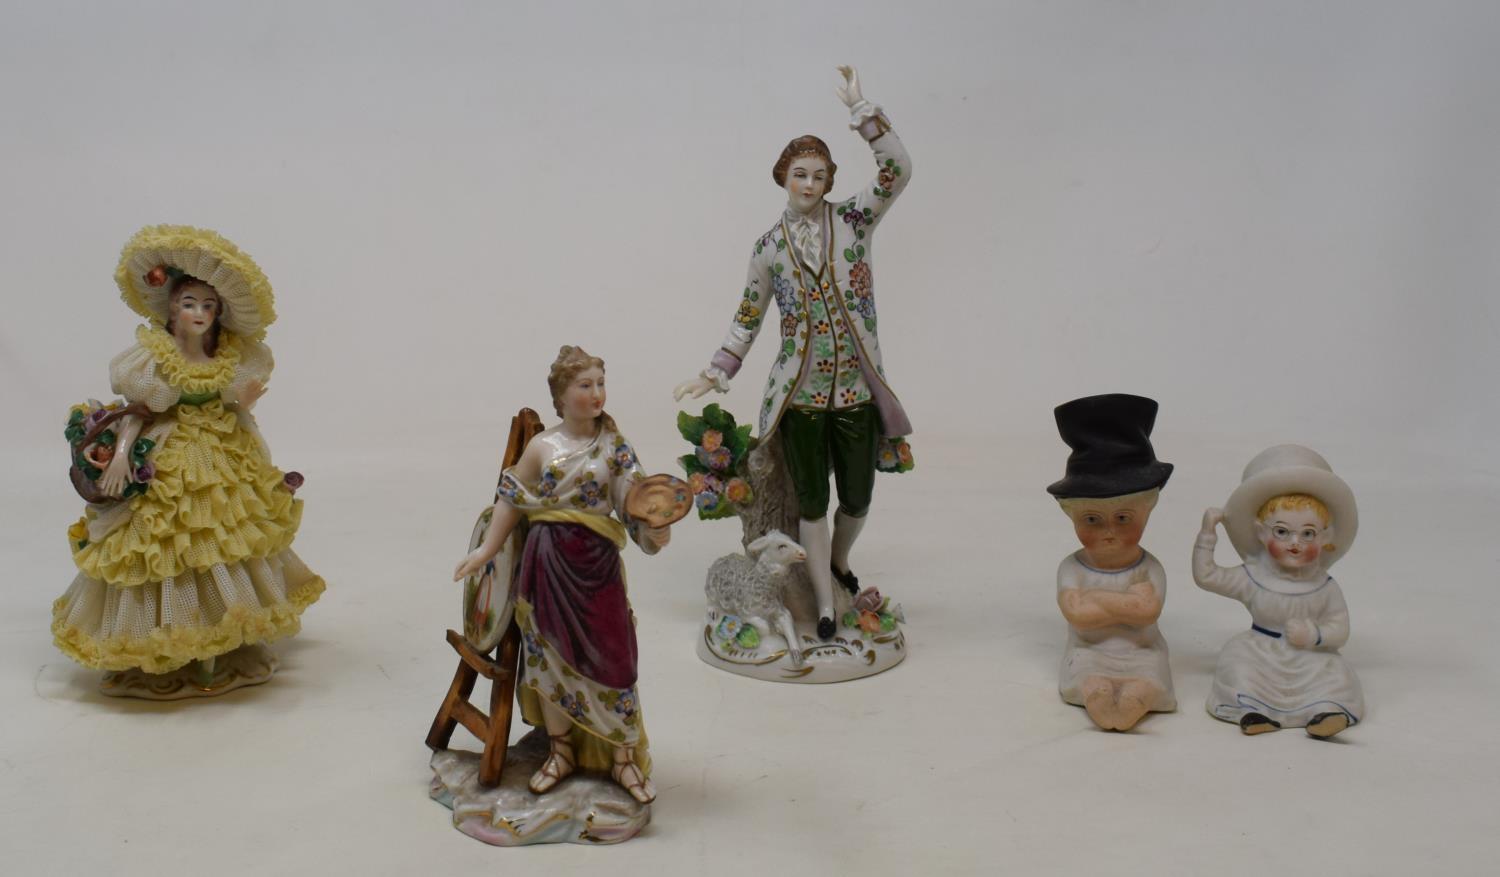 An 19th century Dresden figure of an artist, 12 cm high, and other 19th century and later figures (